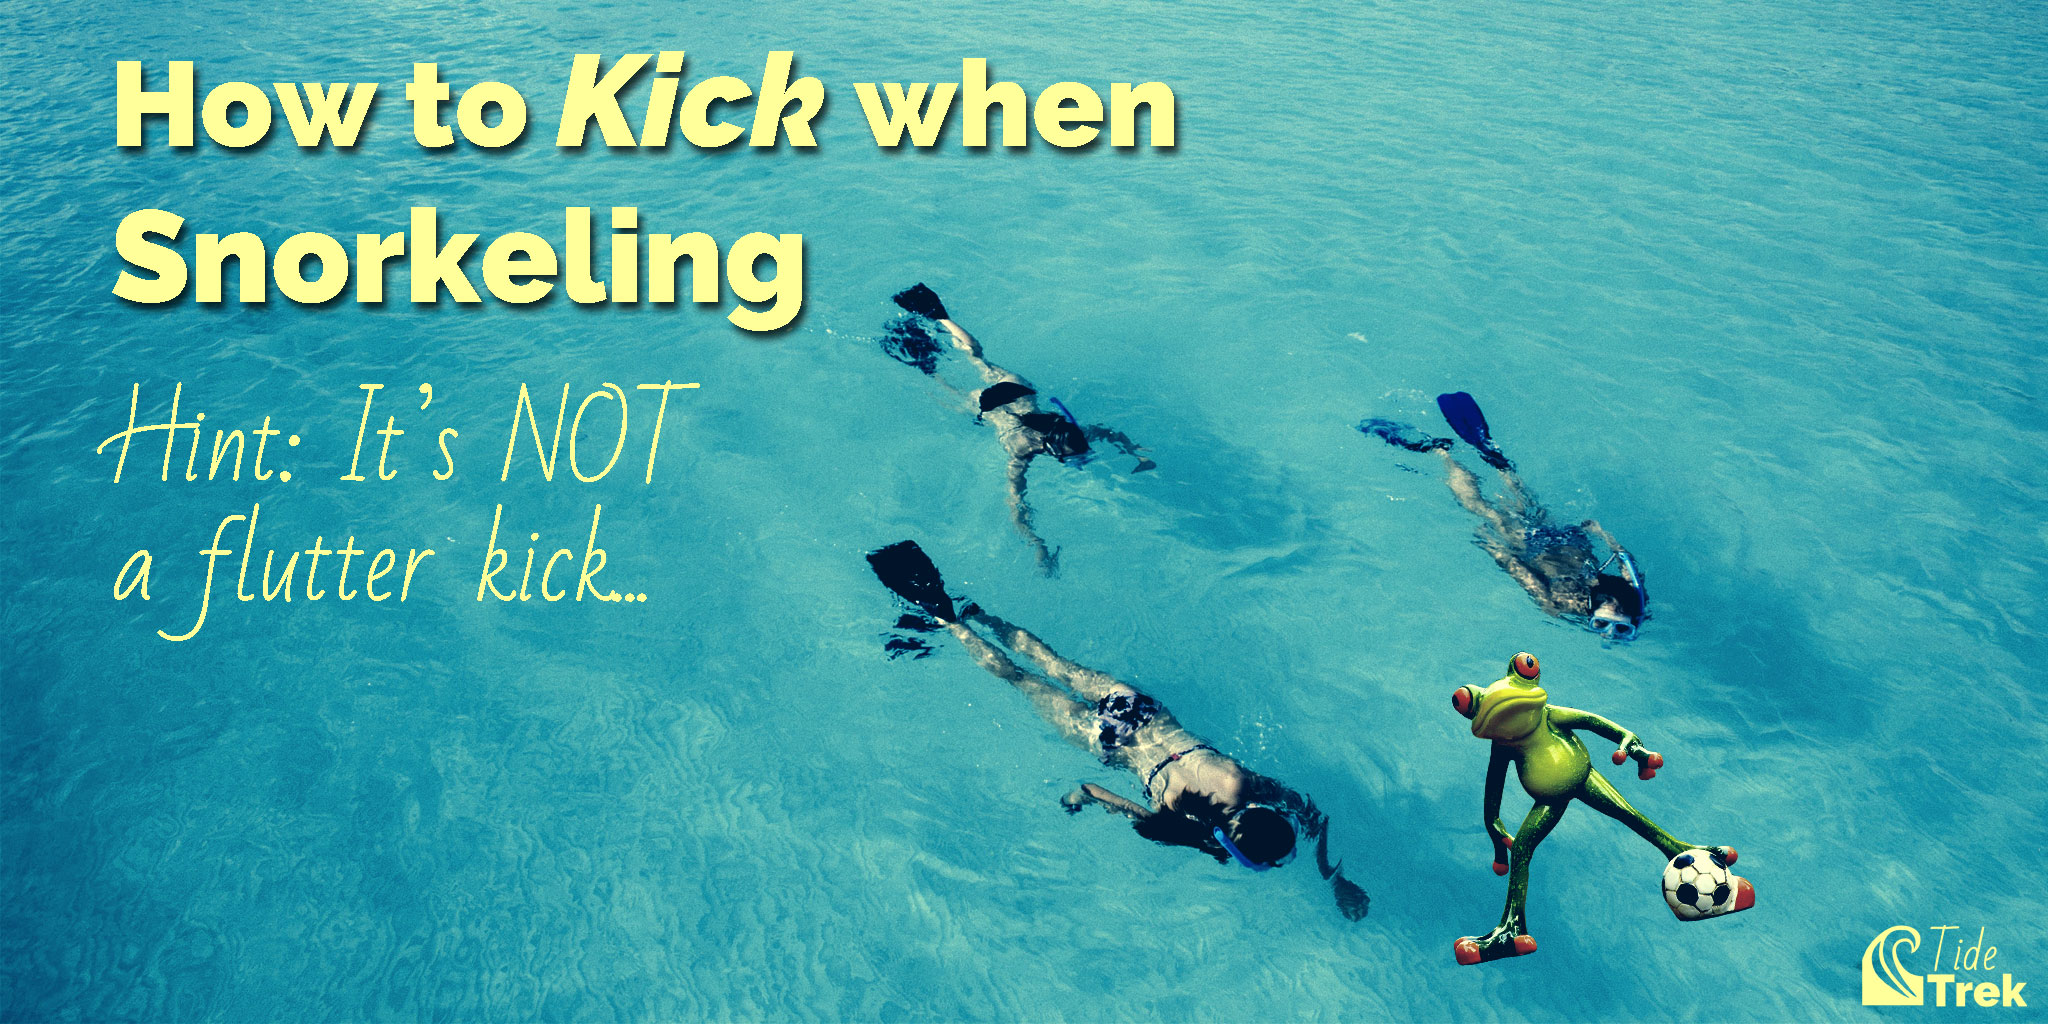 How to kick when snorkeling. Nope, it's not a flutter kick!